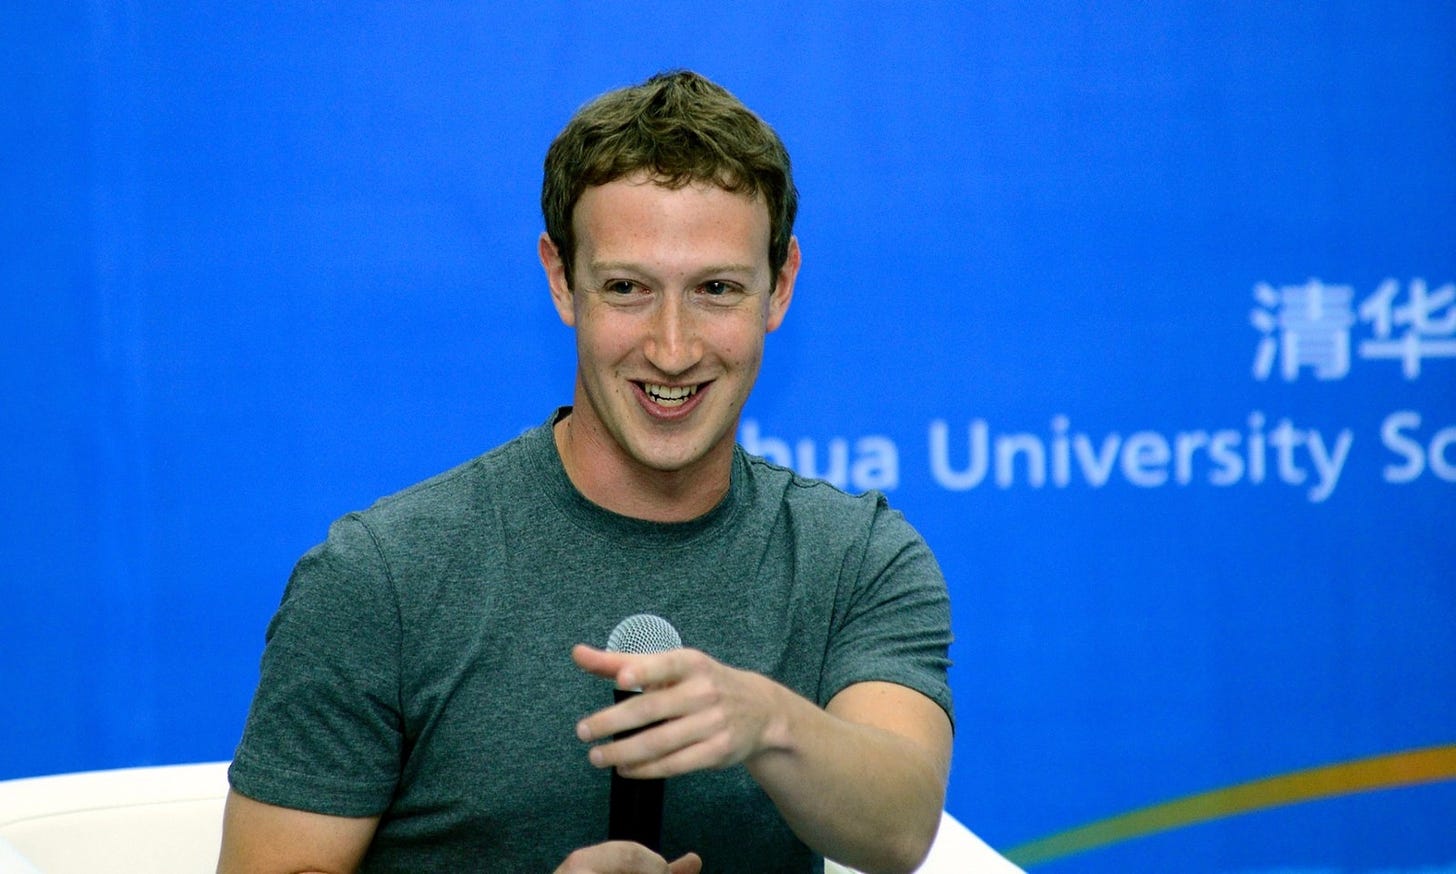 WATCH: Zuckerberg gives 22-minute speech in Chinese – Thatsmags.com